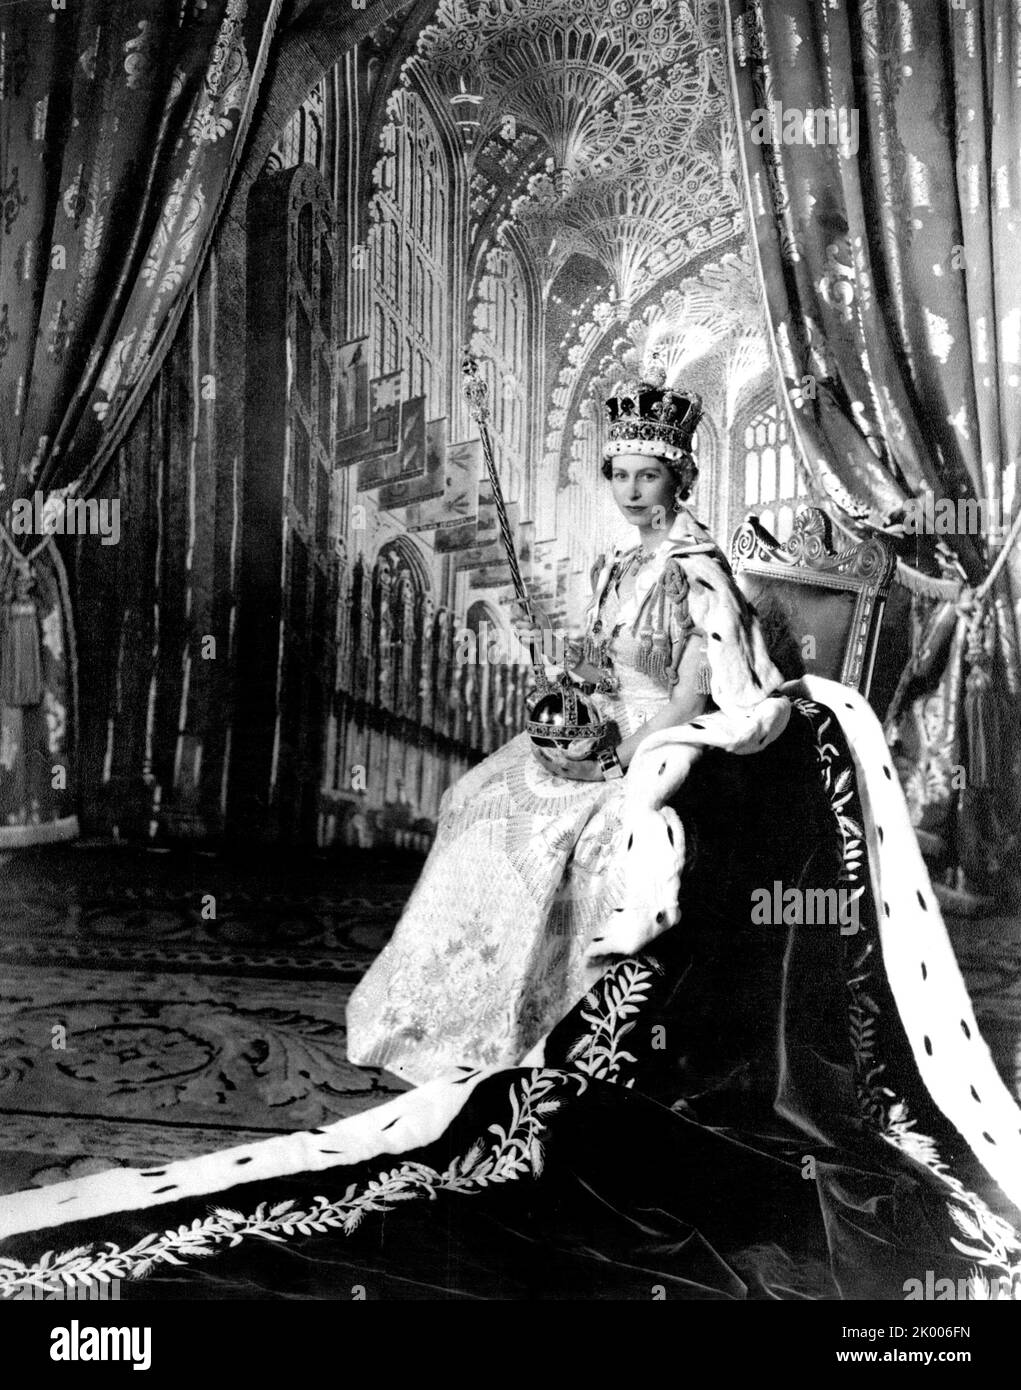 Jun. 2, 1953 - London, England, United Kingdom - QUEEN ELIZABETH II posed for this picture made by C Beaton in the Throne Room at Buckingham Palace after her Coronation on June 2nd.1953. She is attired in her Coronation dress and her purple velvet robe. On her head is the Imperial State Crown. In her left hand she holds the Orb, and in her right the Sceptre with Cross. On her wrists she wears the Armills, or bracelets of Sincerity. (Credit Image: © Keystone Press Agency/ZUMA Press Wire) Stock Photo